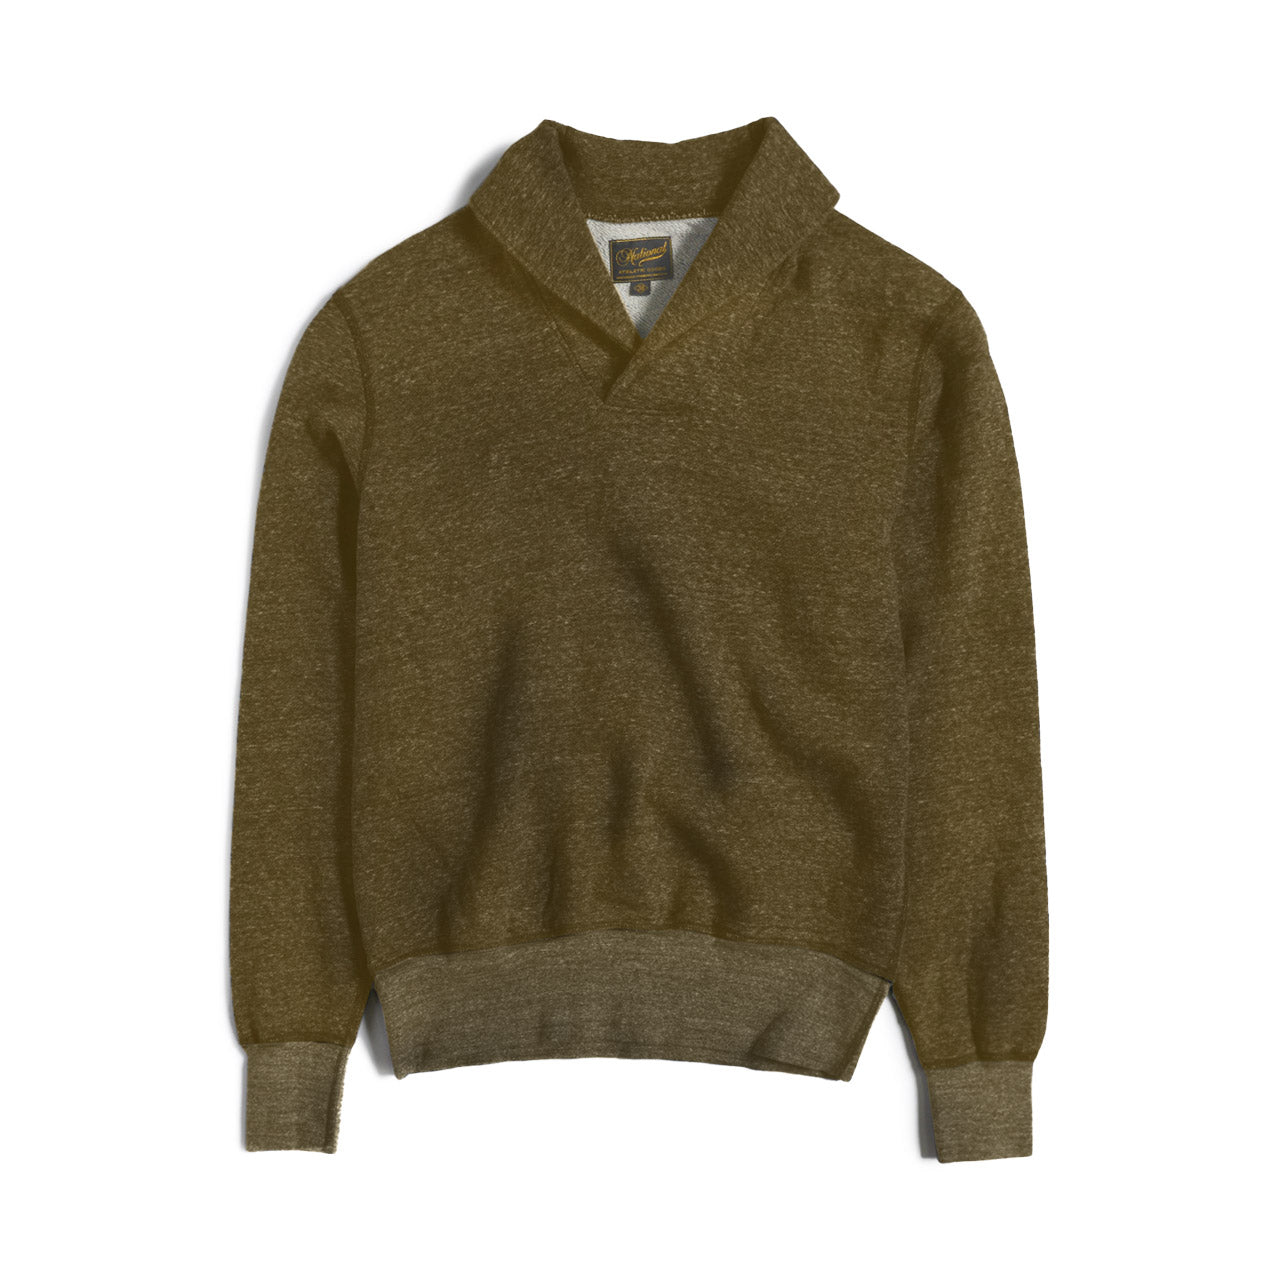 National Athletic Goods Shawl Pullover